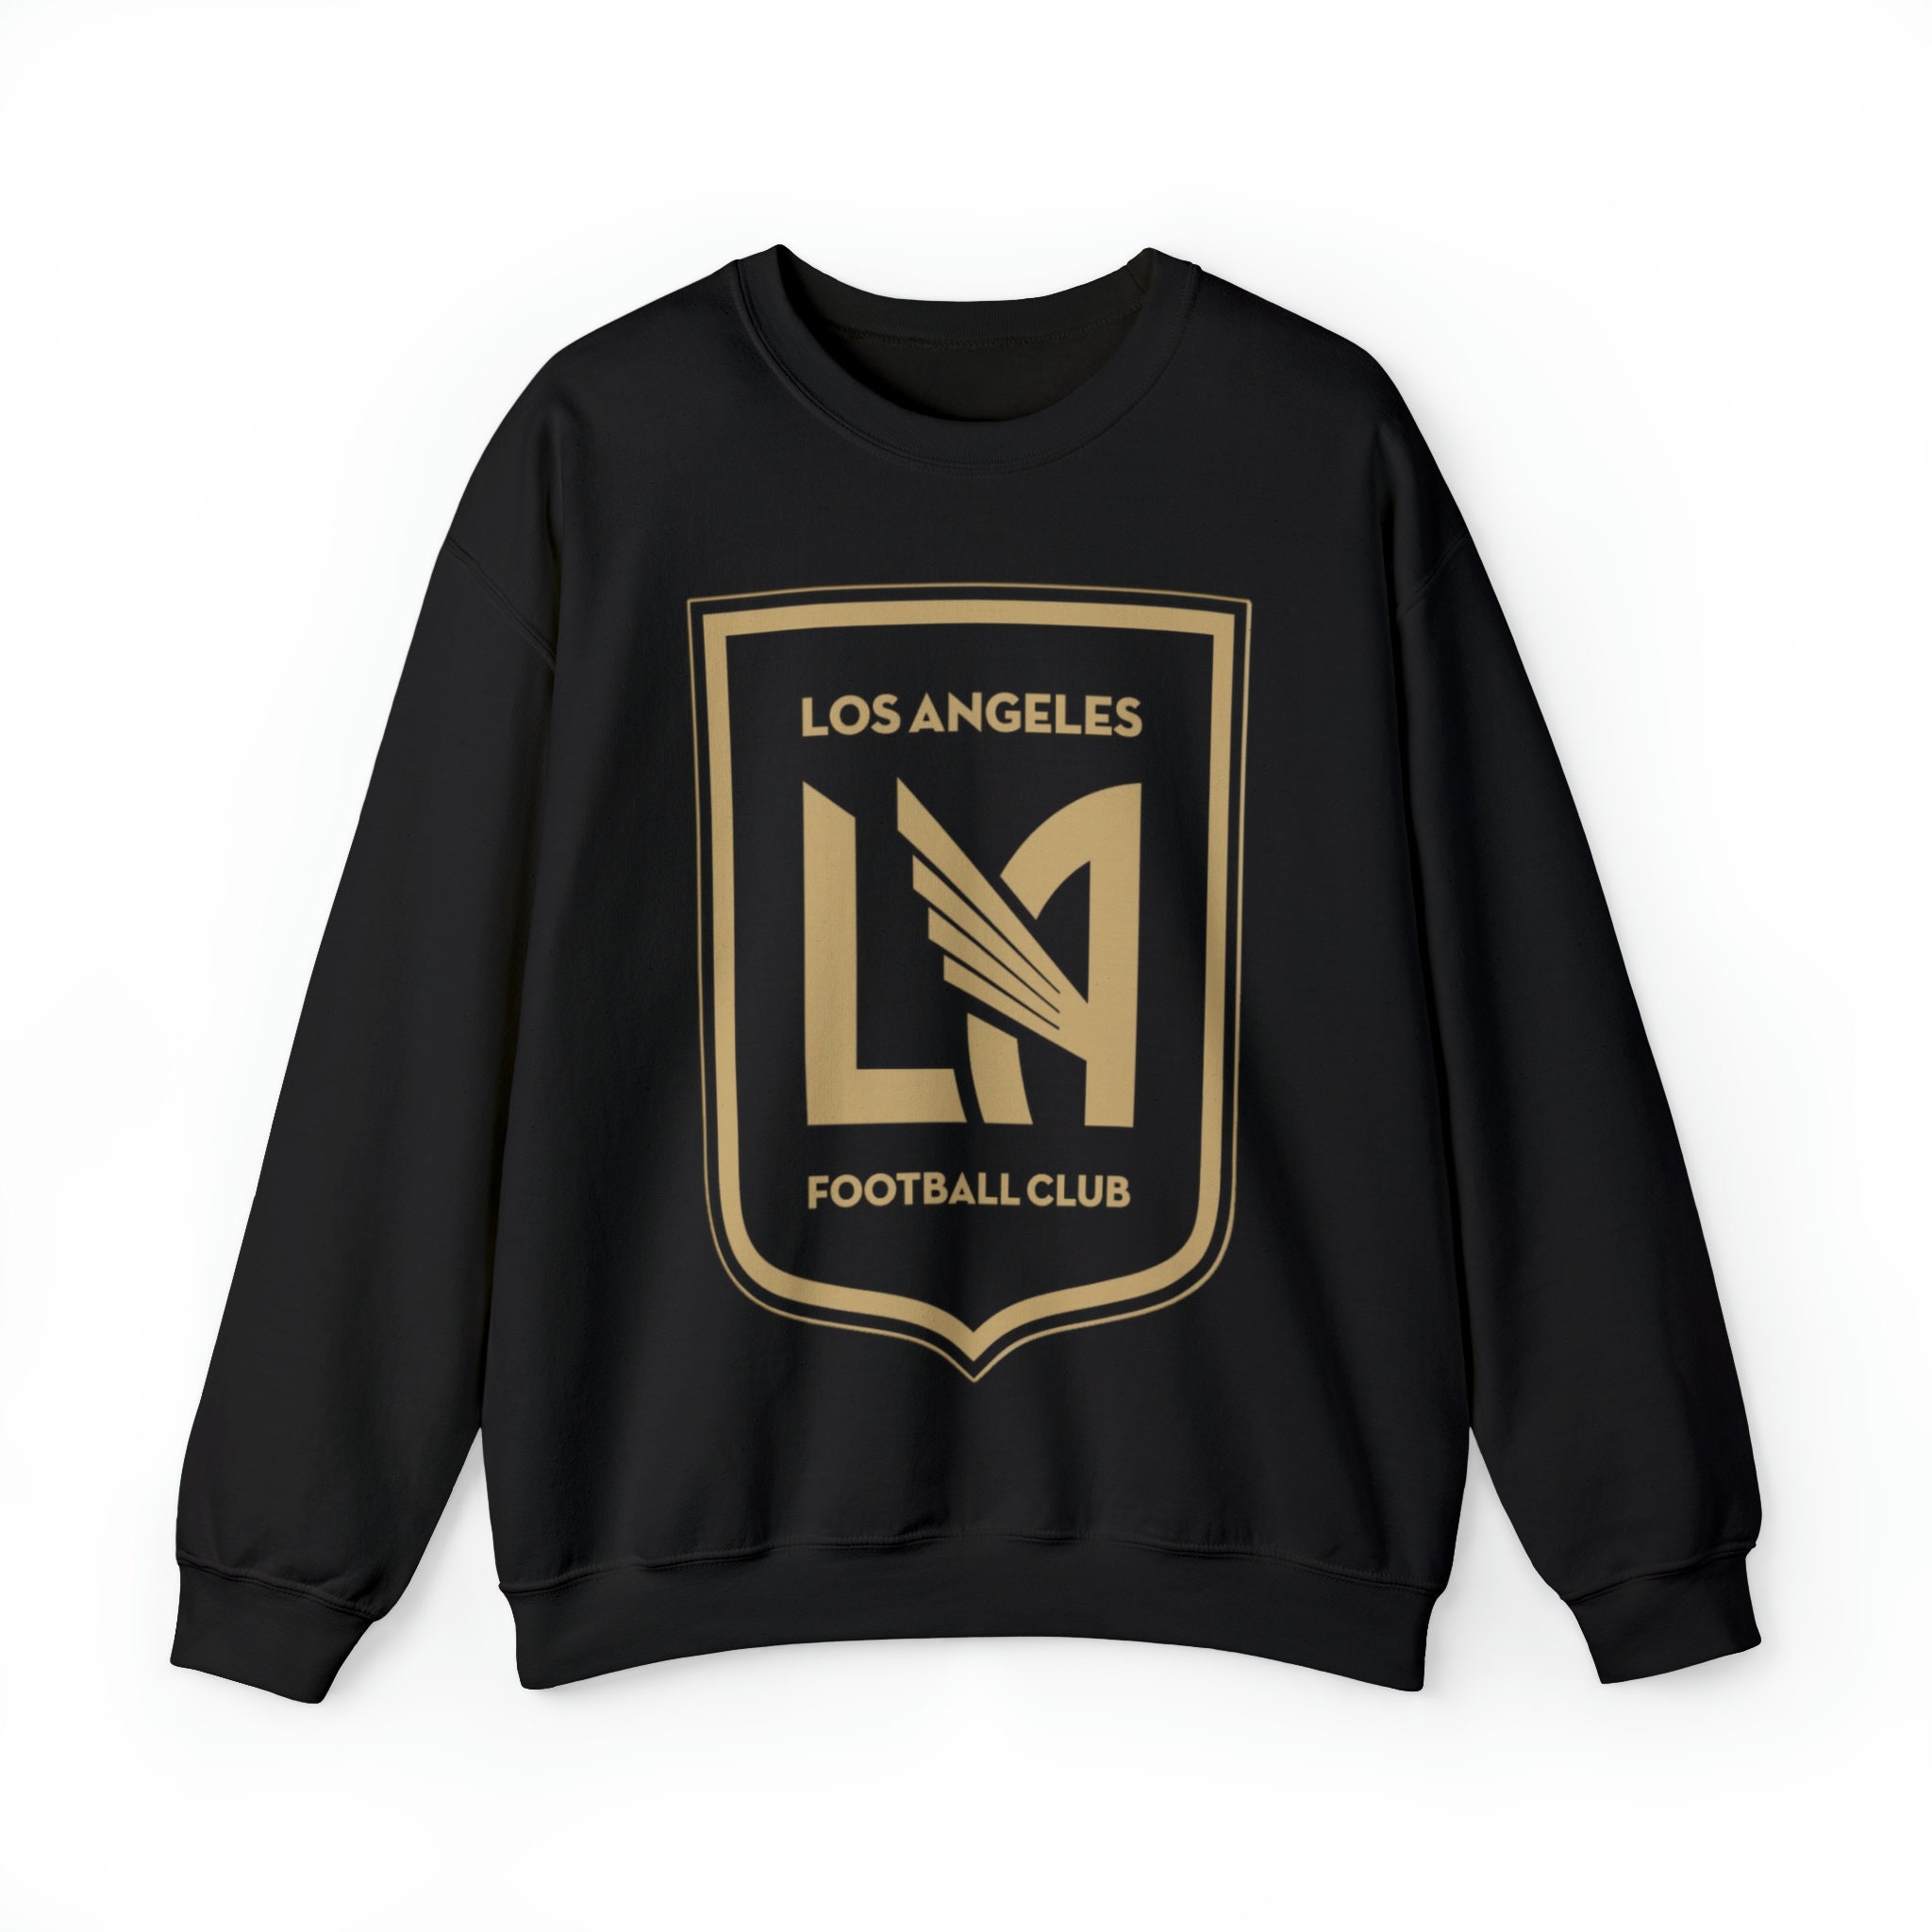 Buy Lafc Shirt Online In India -  India